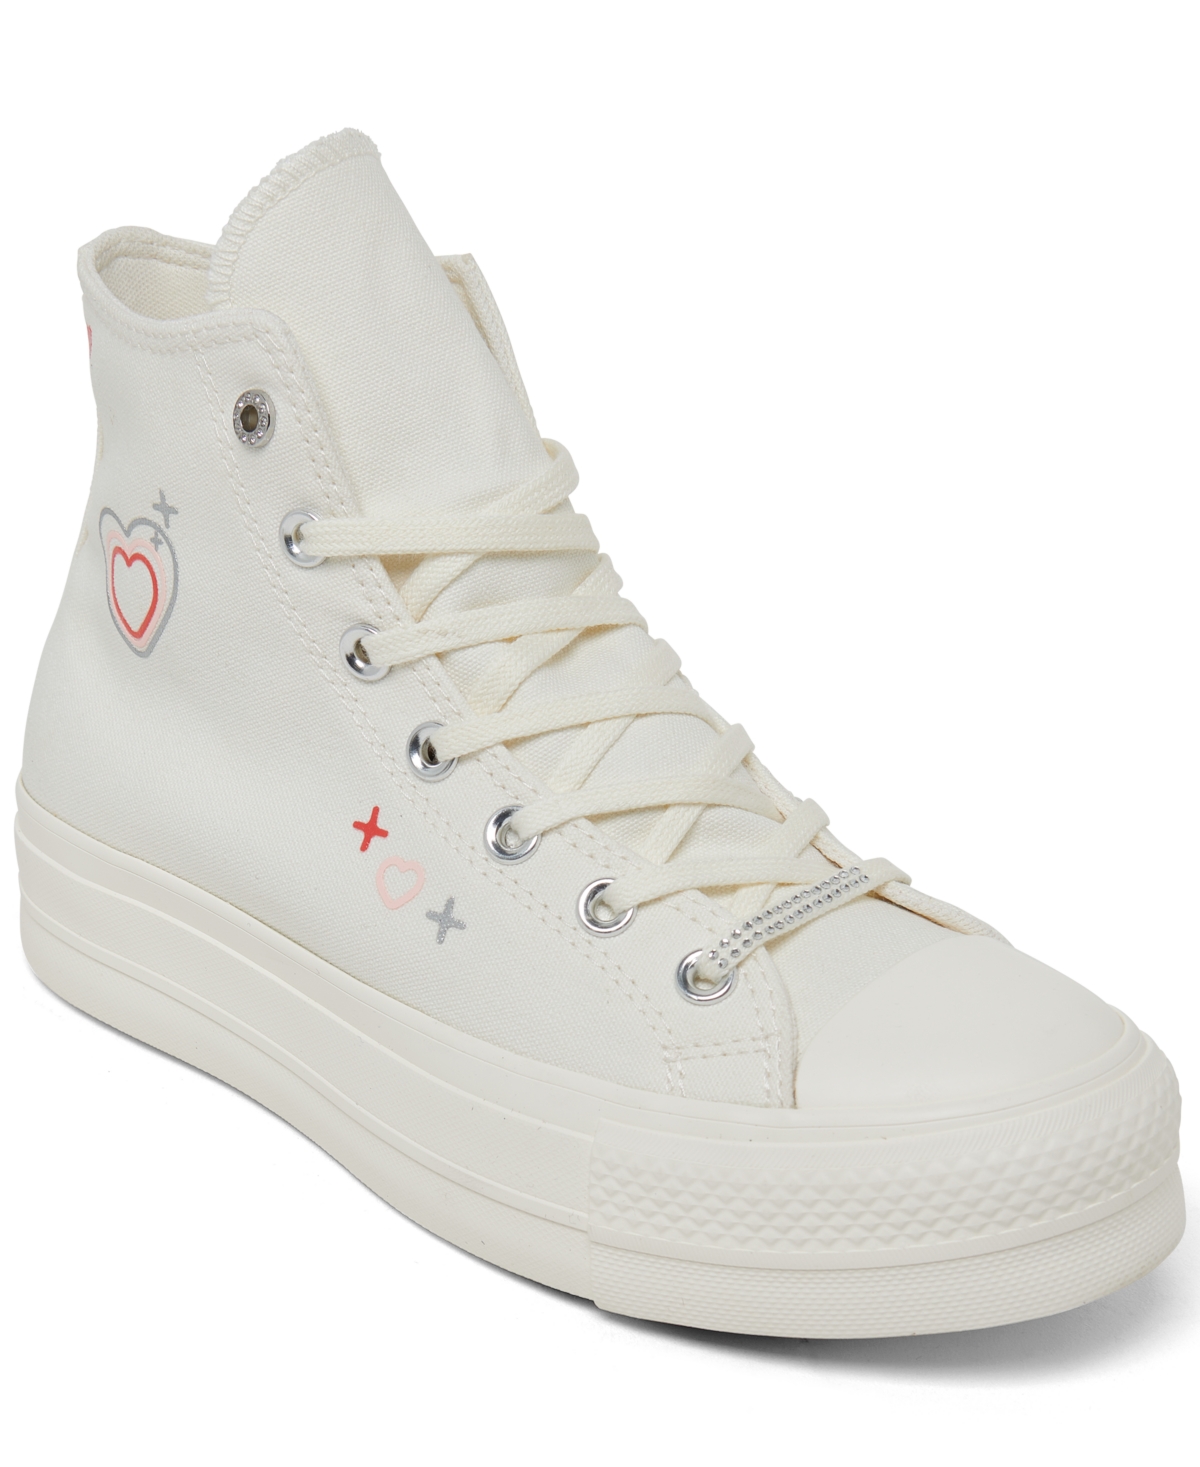 Converse Women's Chuck Taylor All Star Lift Platform Y2k Heart High Top Casual Sneakers From Finish Line In Egret,fever Dream